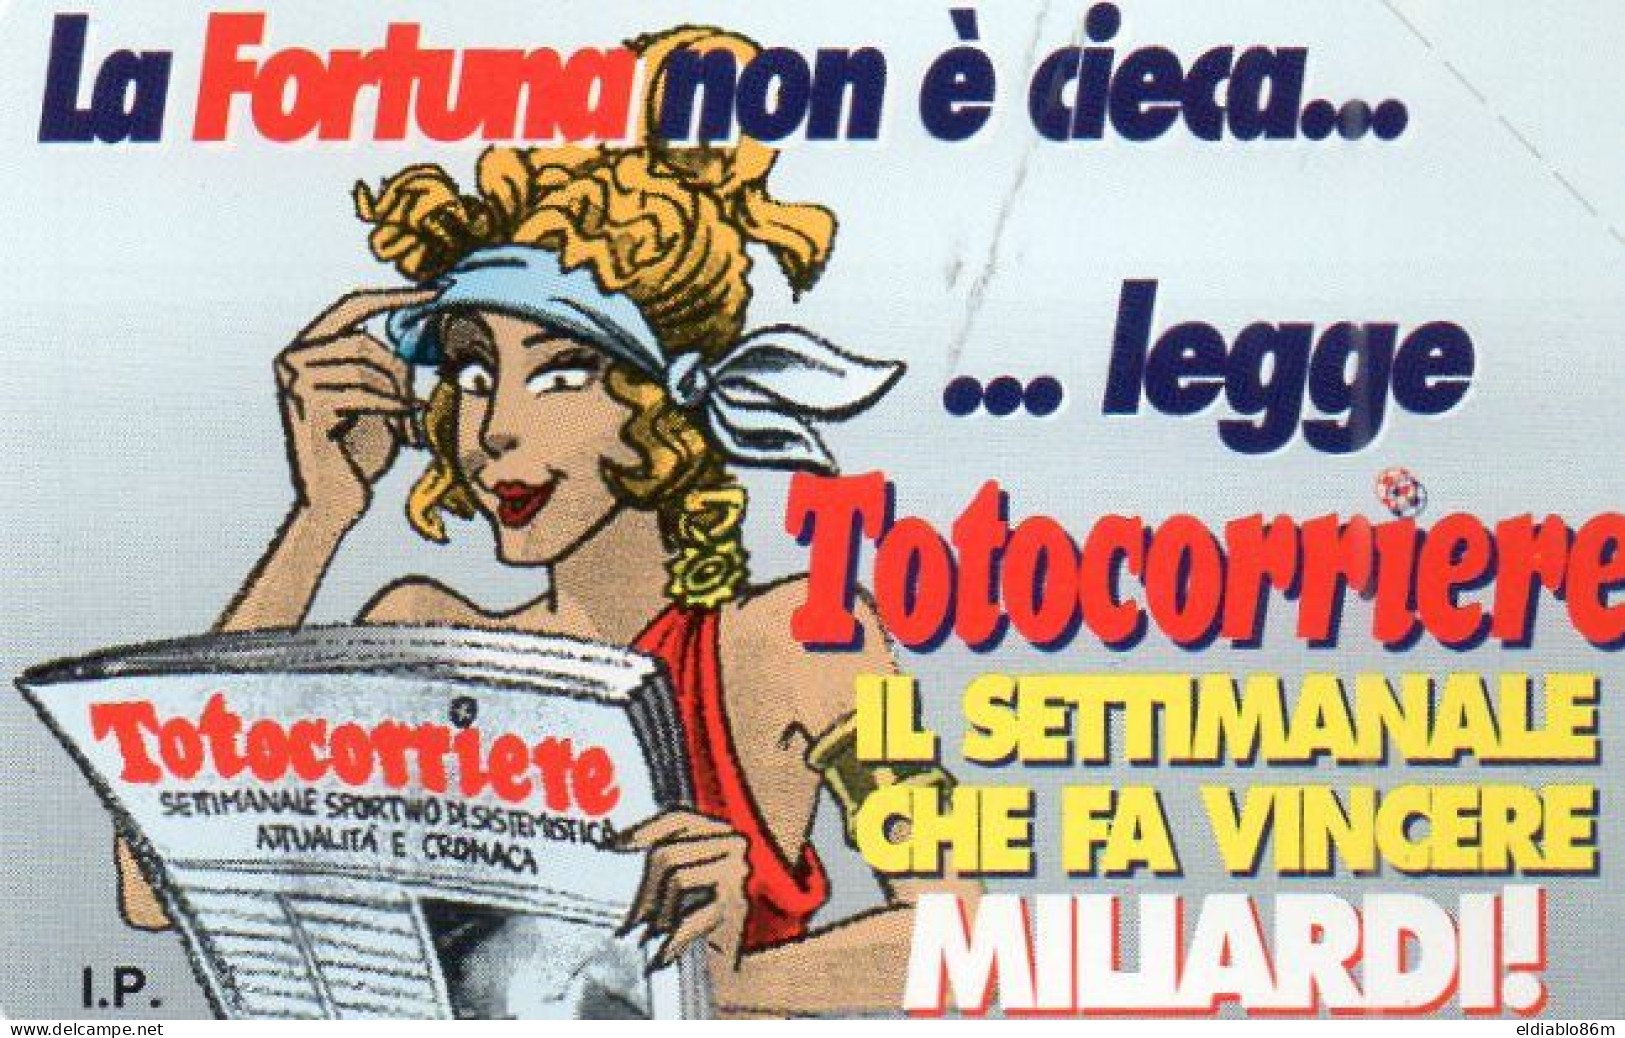 ITALY - MAGNETIC CARD - TELECOM - PRIVATE RESE PUBBLICHE - 341 - TOTOCORRIERE - CARTOON - MINT - Private New Editions